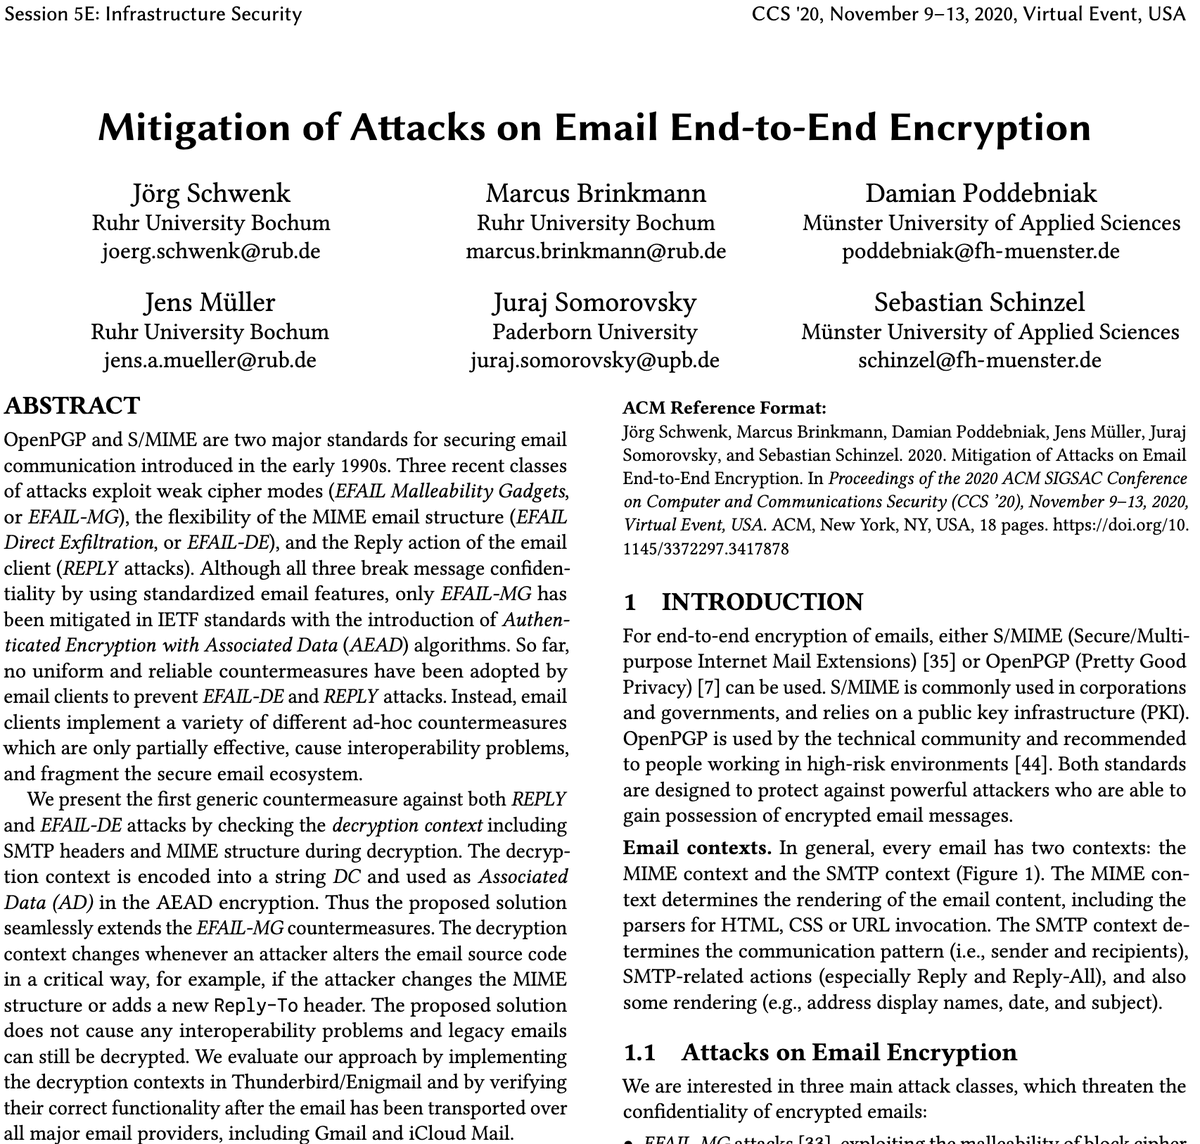 New paper on how to fix #efail style attacks against e2e encrypted email, including OpenPGP and S/MIME. Joint work with @JoergSchwenk @lambdafu @dues__ @jensvoid @jurajsomorovsky @seecurity. To be presented at @acm_ccs 2020. Thread: